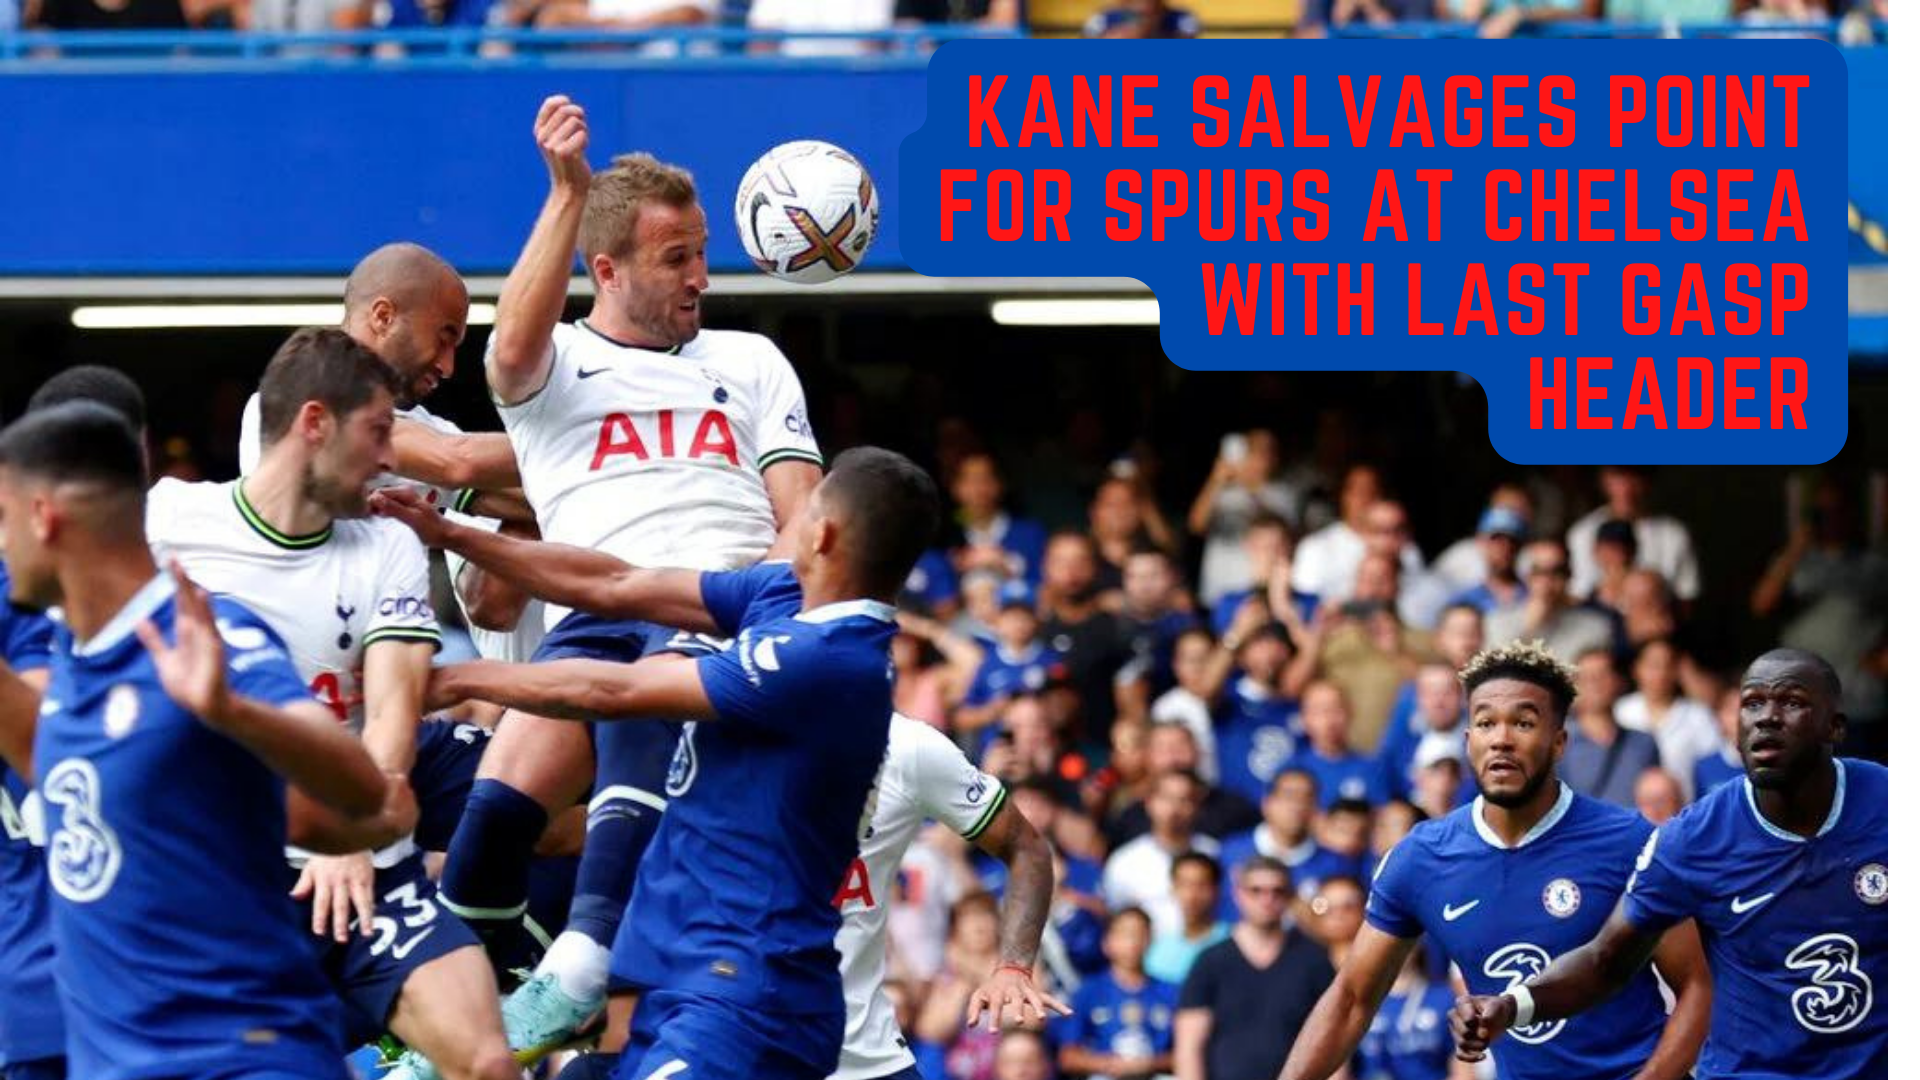 Kane Salvages Point For Spurs At Chelsea With Last Gasp Header